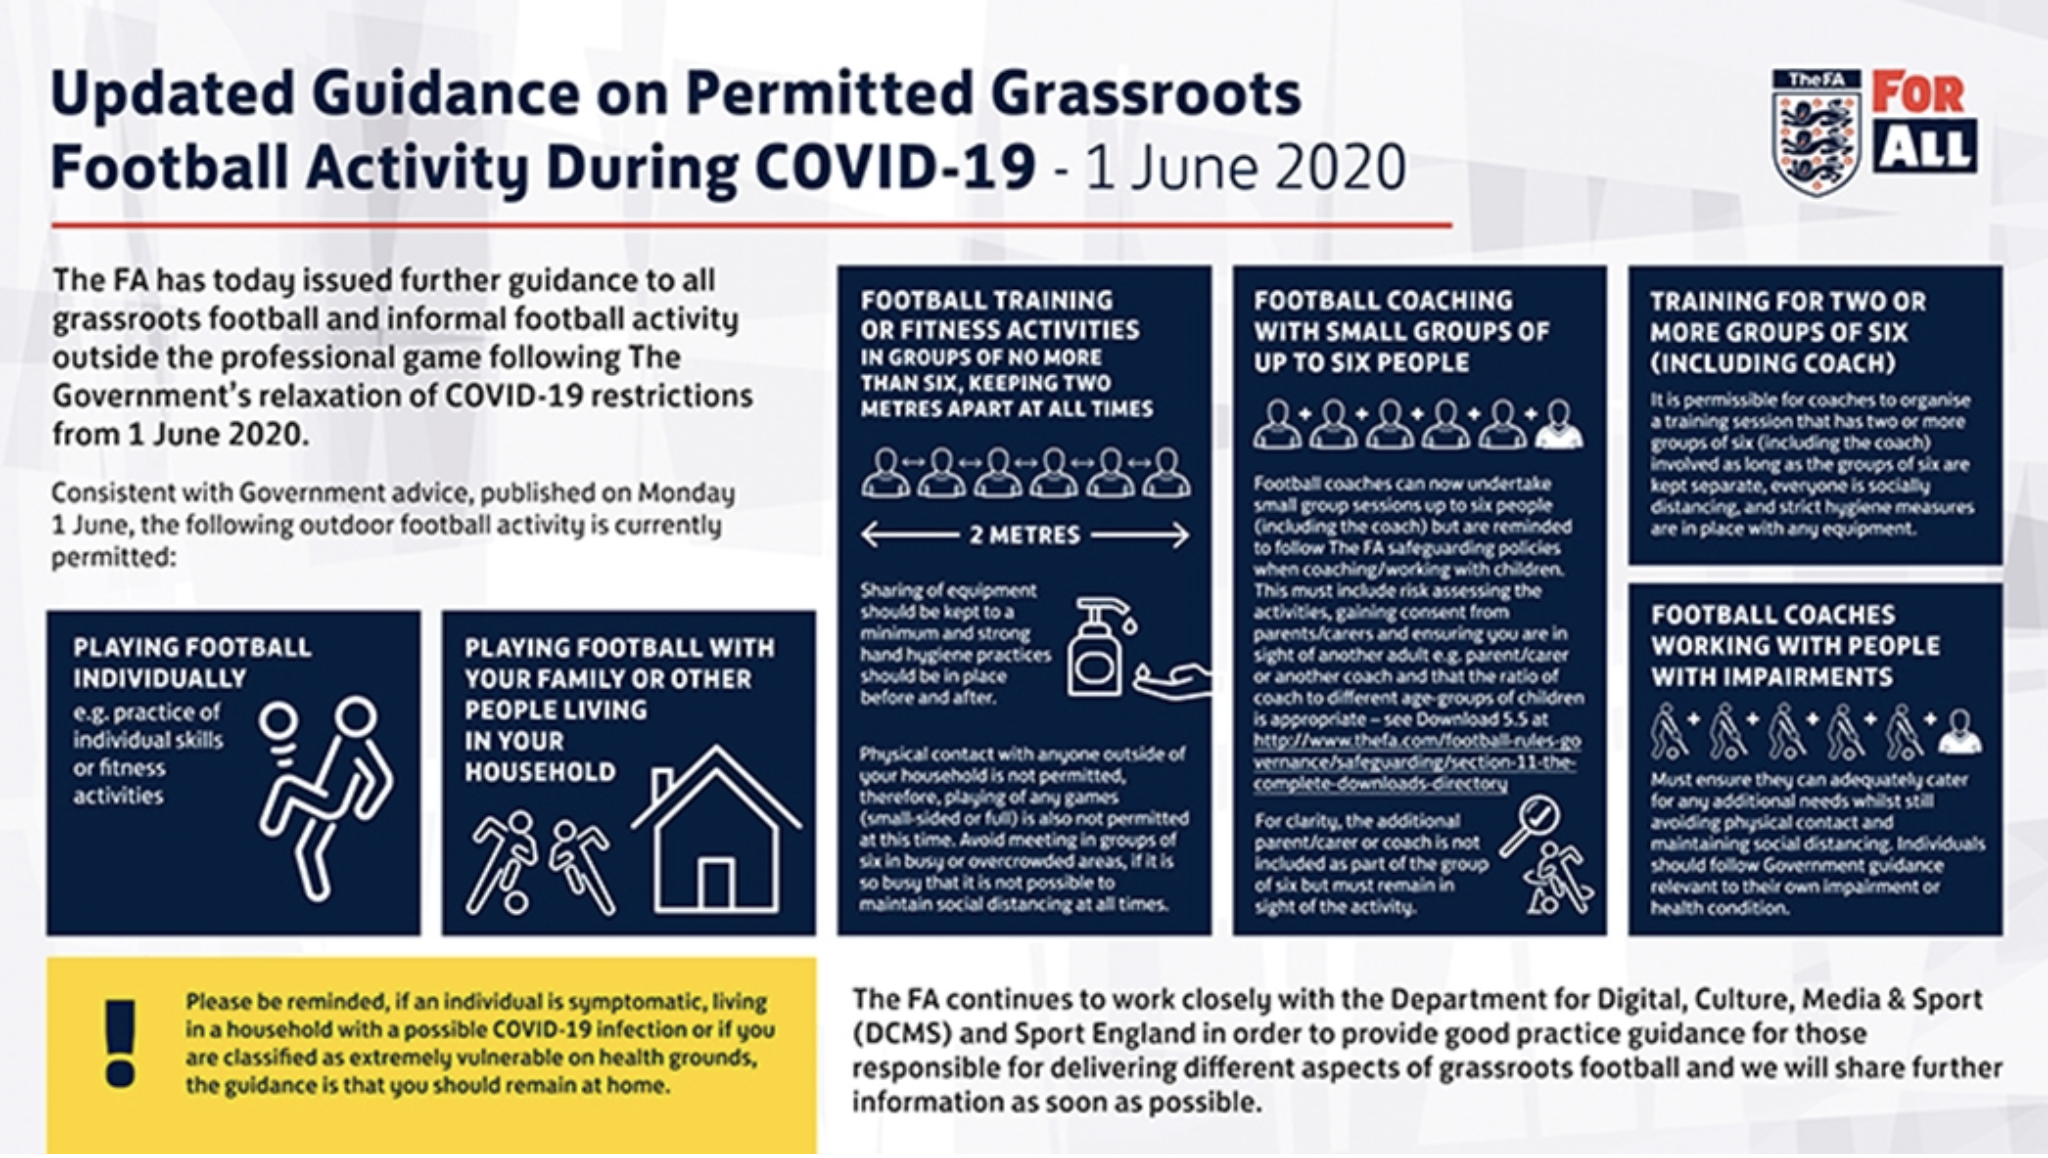 Latest guidance on permitted grassroots football activity during Covid-19 from 1st June